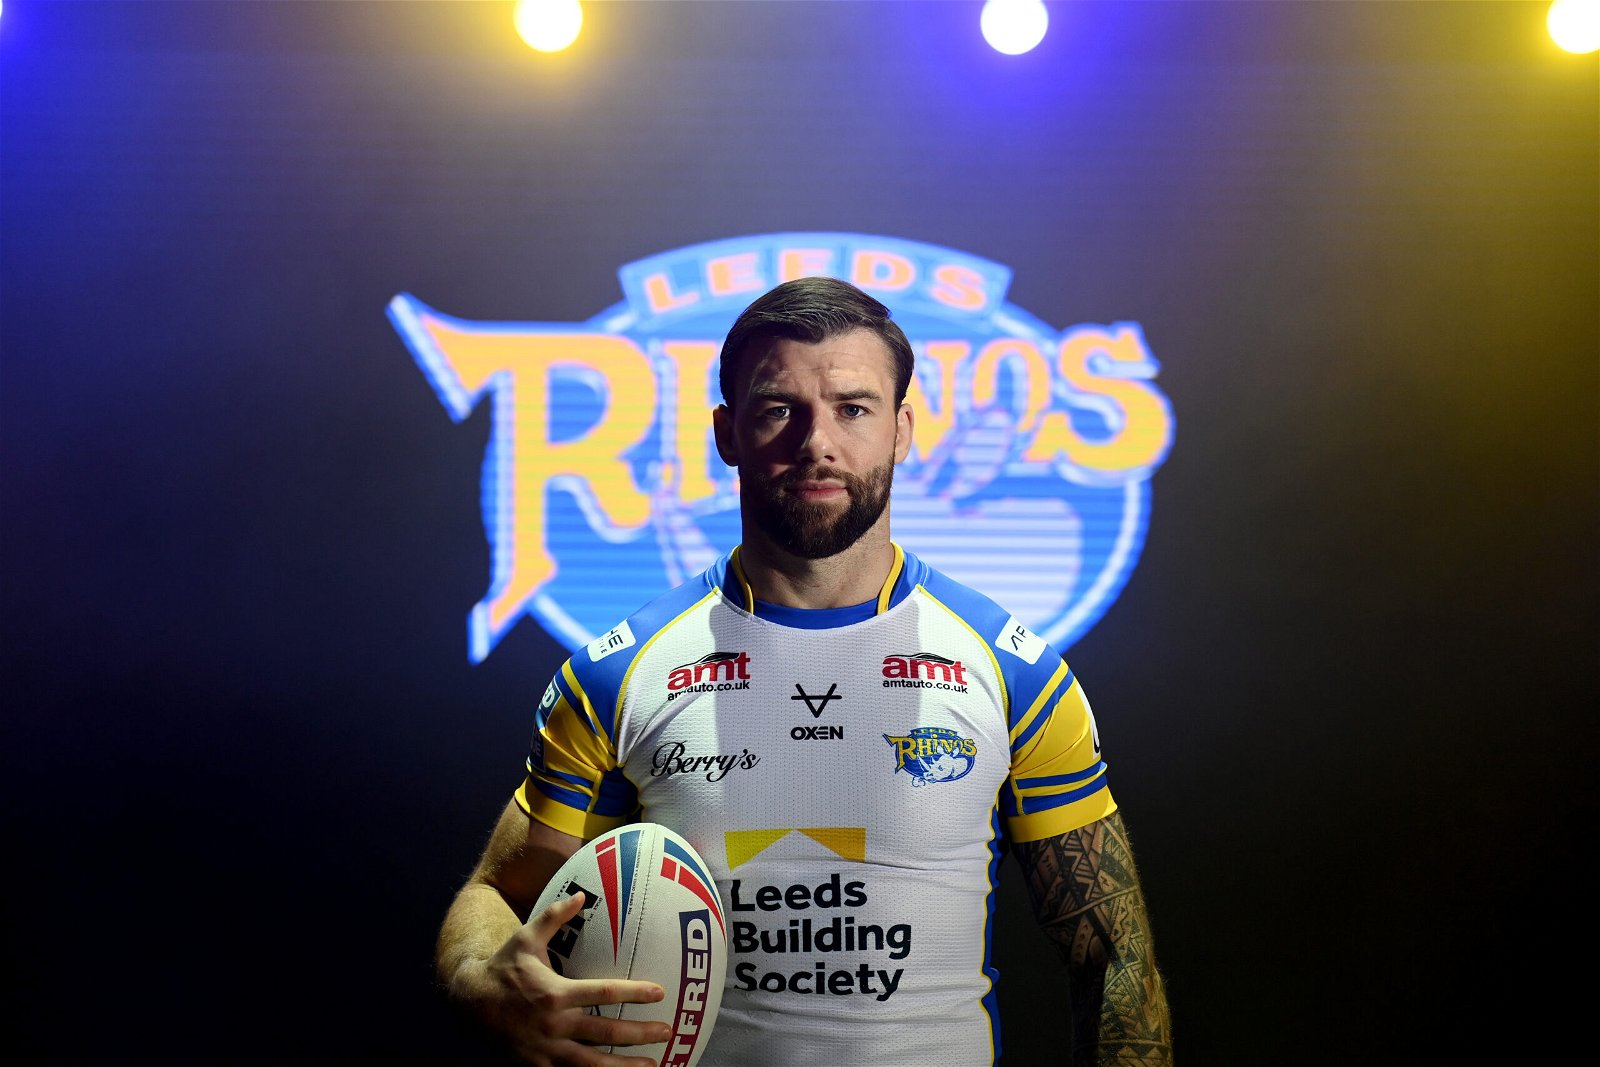 Andy Ackers in studio light models the new Leeds Rhinos kit at the Super LEague launch day.It's white (yeah) with blue collar and blue sleeves. The sleeves have a yellow stripe on, too. The AMT logo, Berry's cursive logo and OXEN can be seen. Leeds Building Society returns as main sponsor.